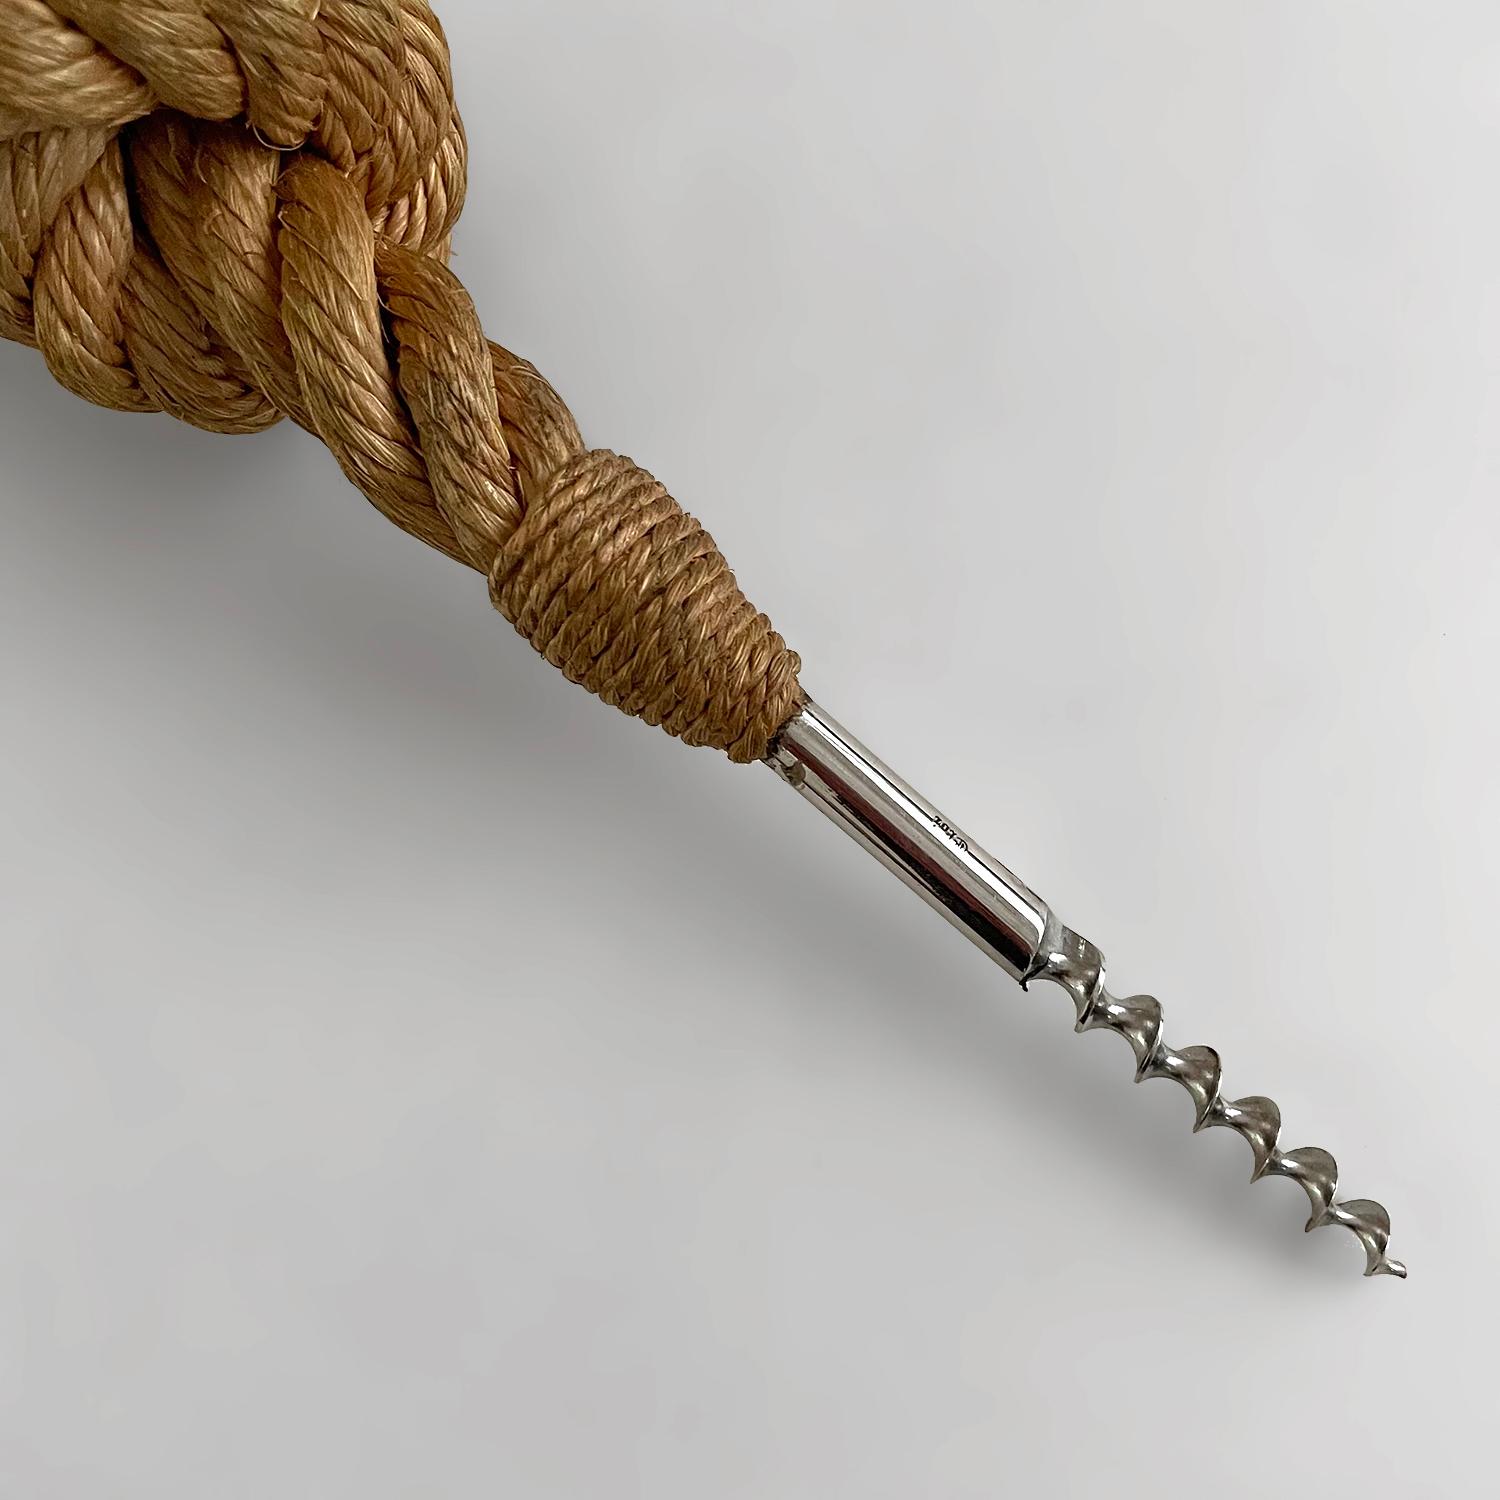 Mid-20th Century Audoux Minet French Rope Corkscrew Wine Opener For Sale